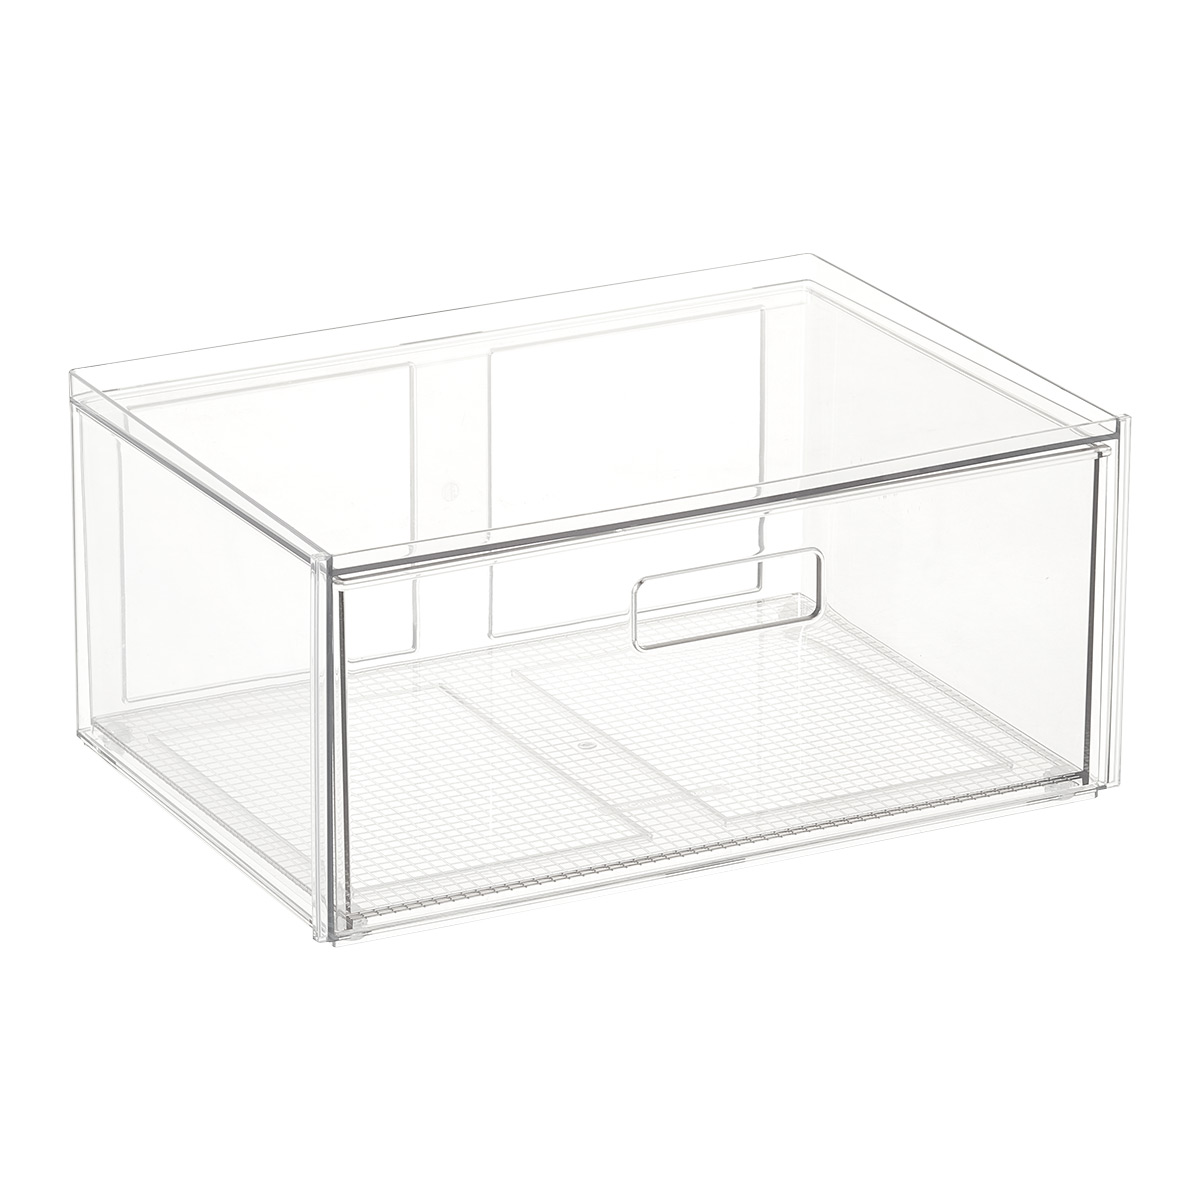 https://www.containerstore.com/catalogimages/517911/10092527-everything-12-inch-drawer.jpg